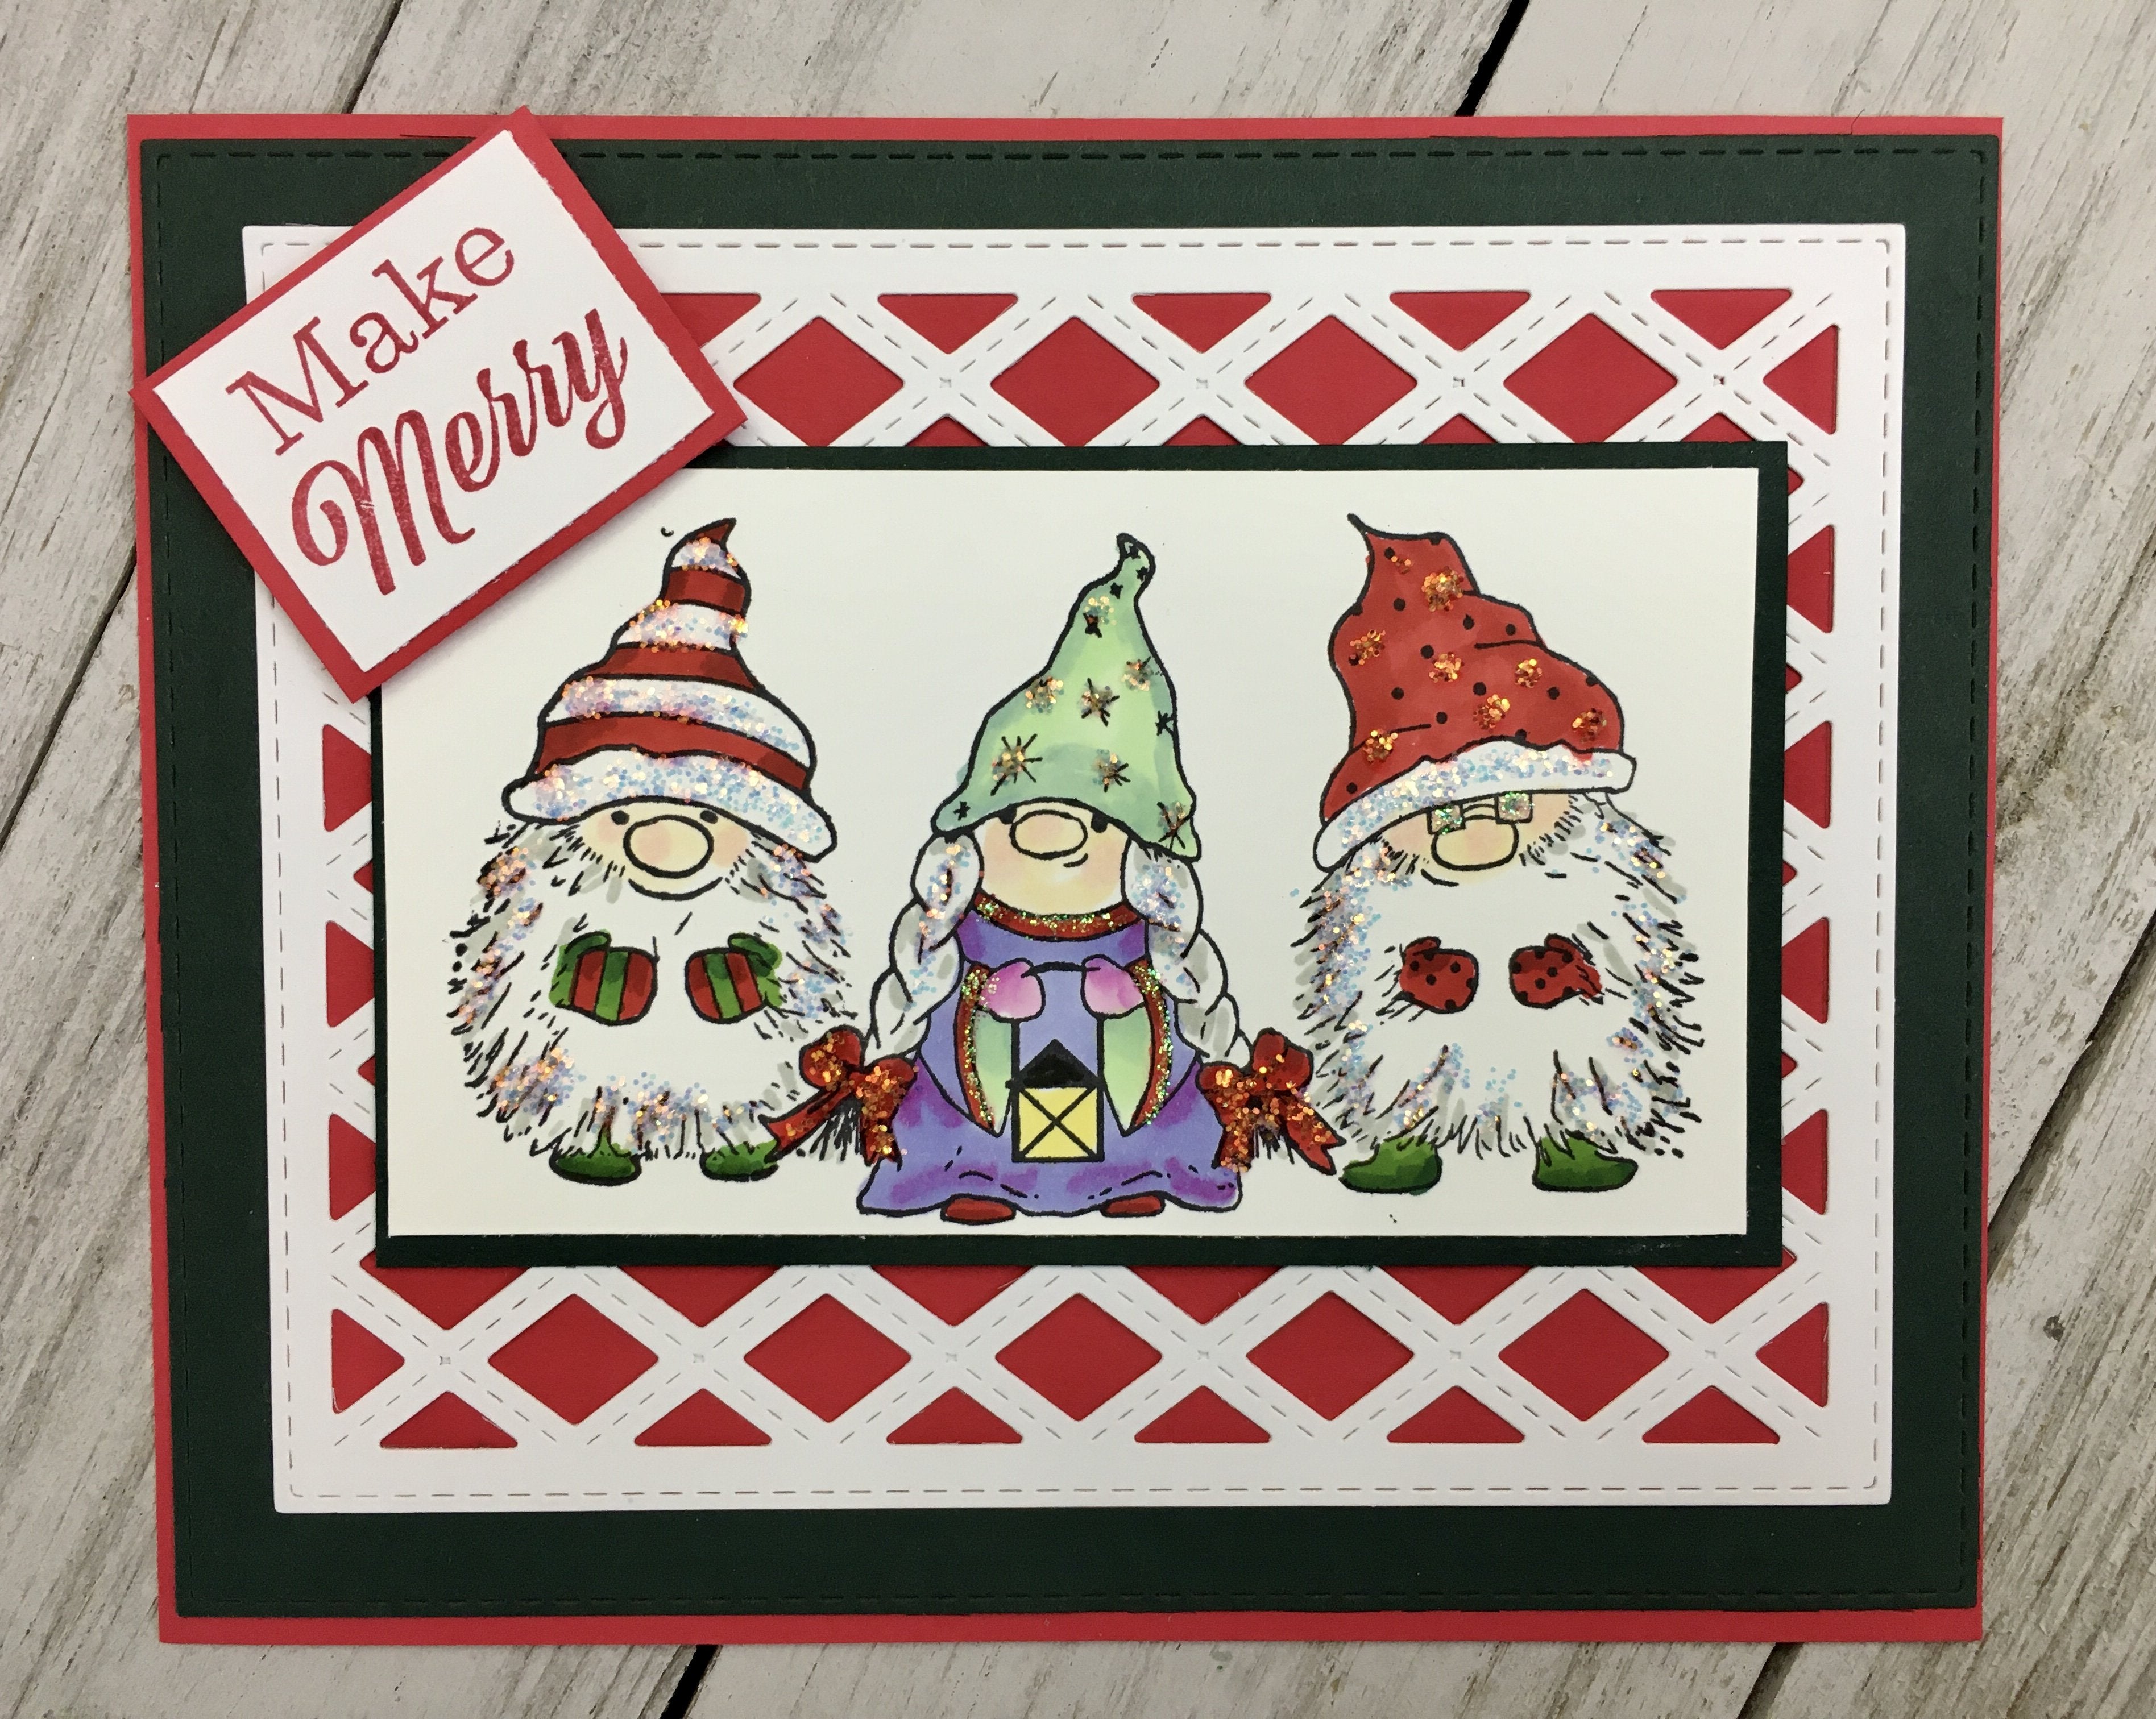 The Wise Gnomes Rubber Cling Stamp